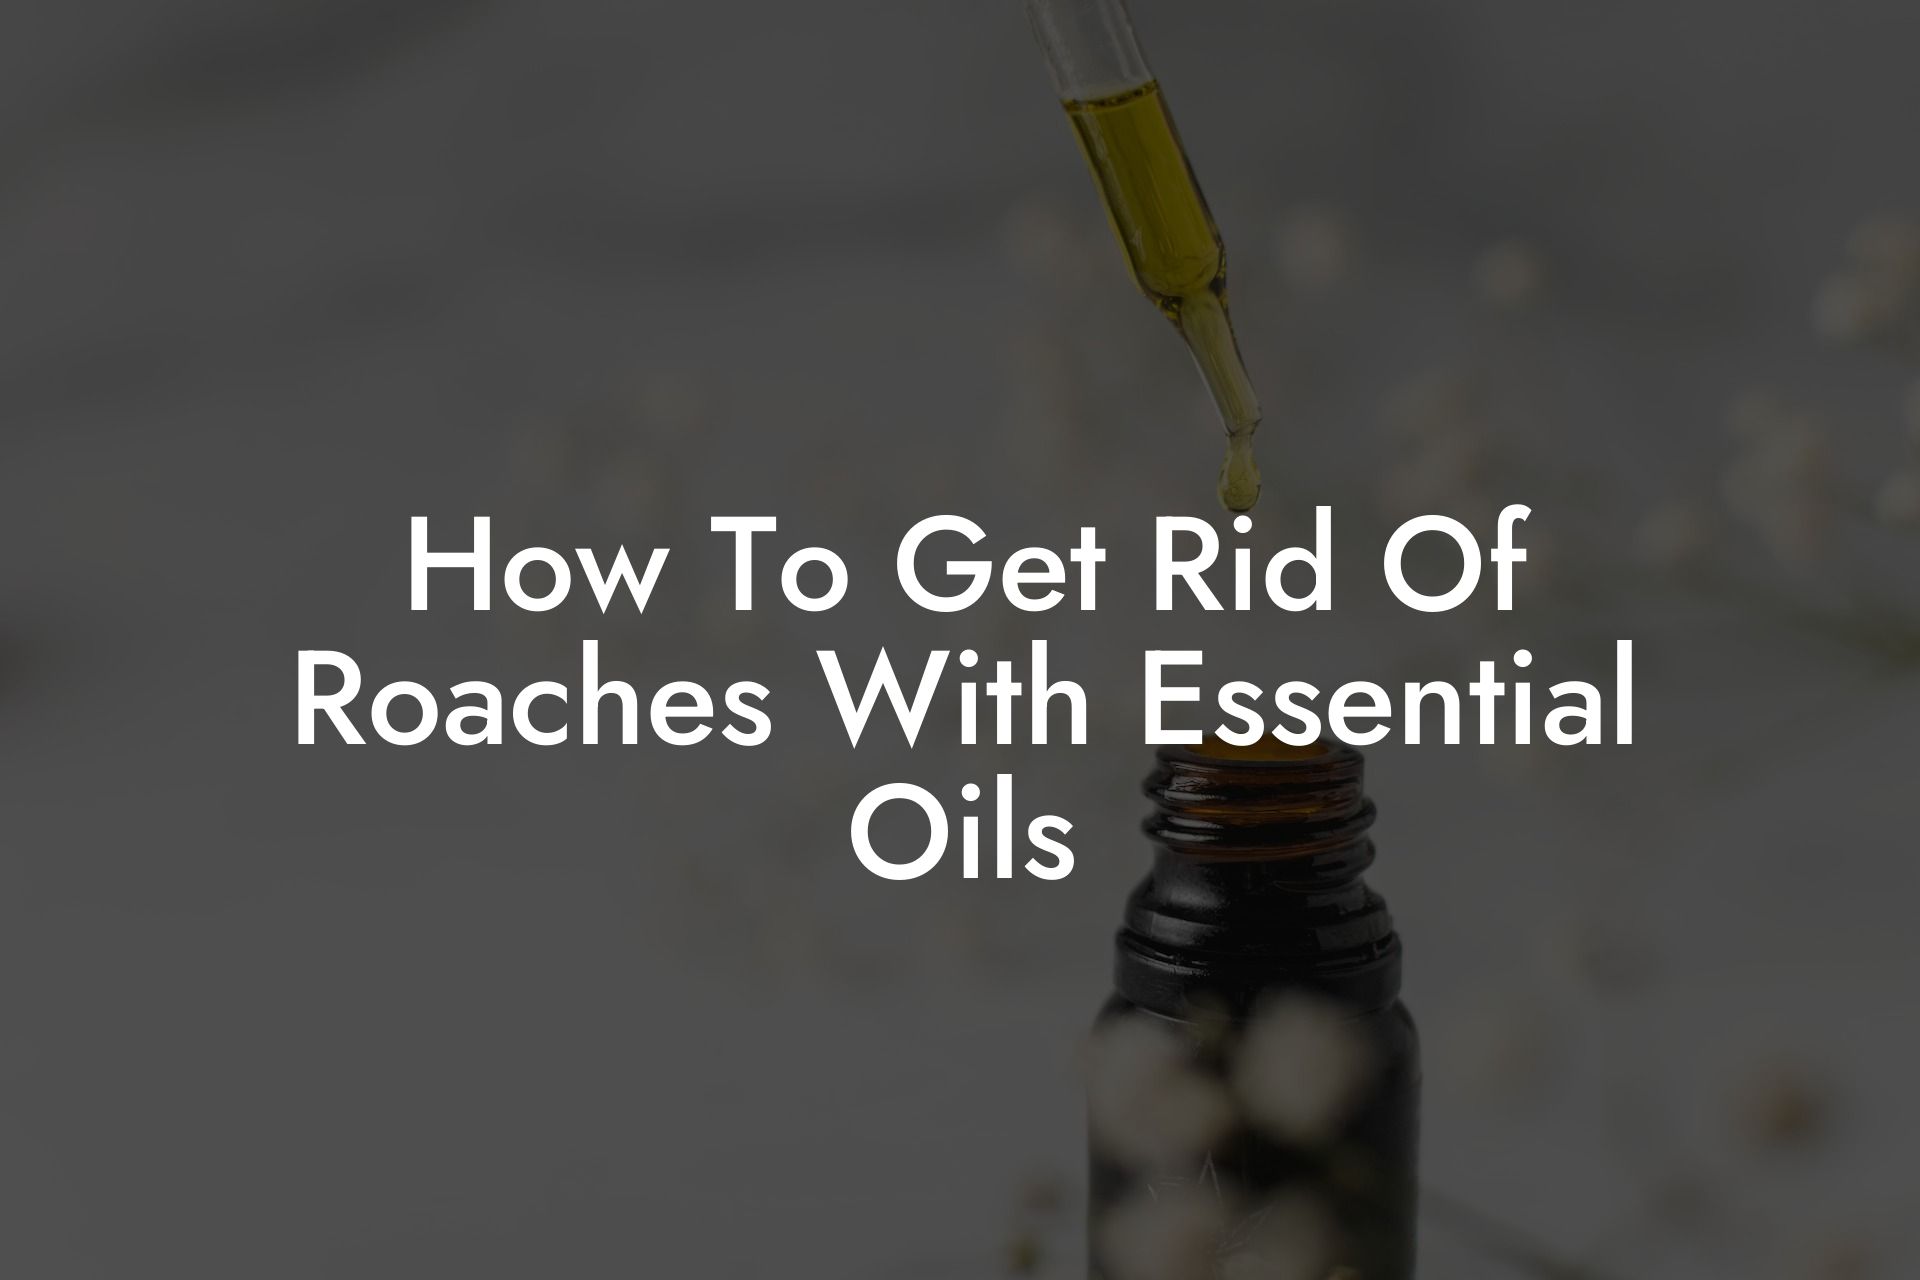 How To Get Rid Of Roaches With Essential Oils